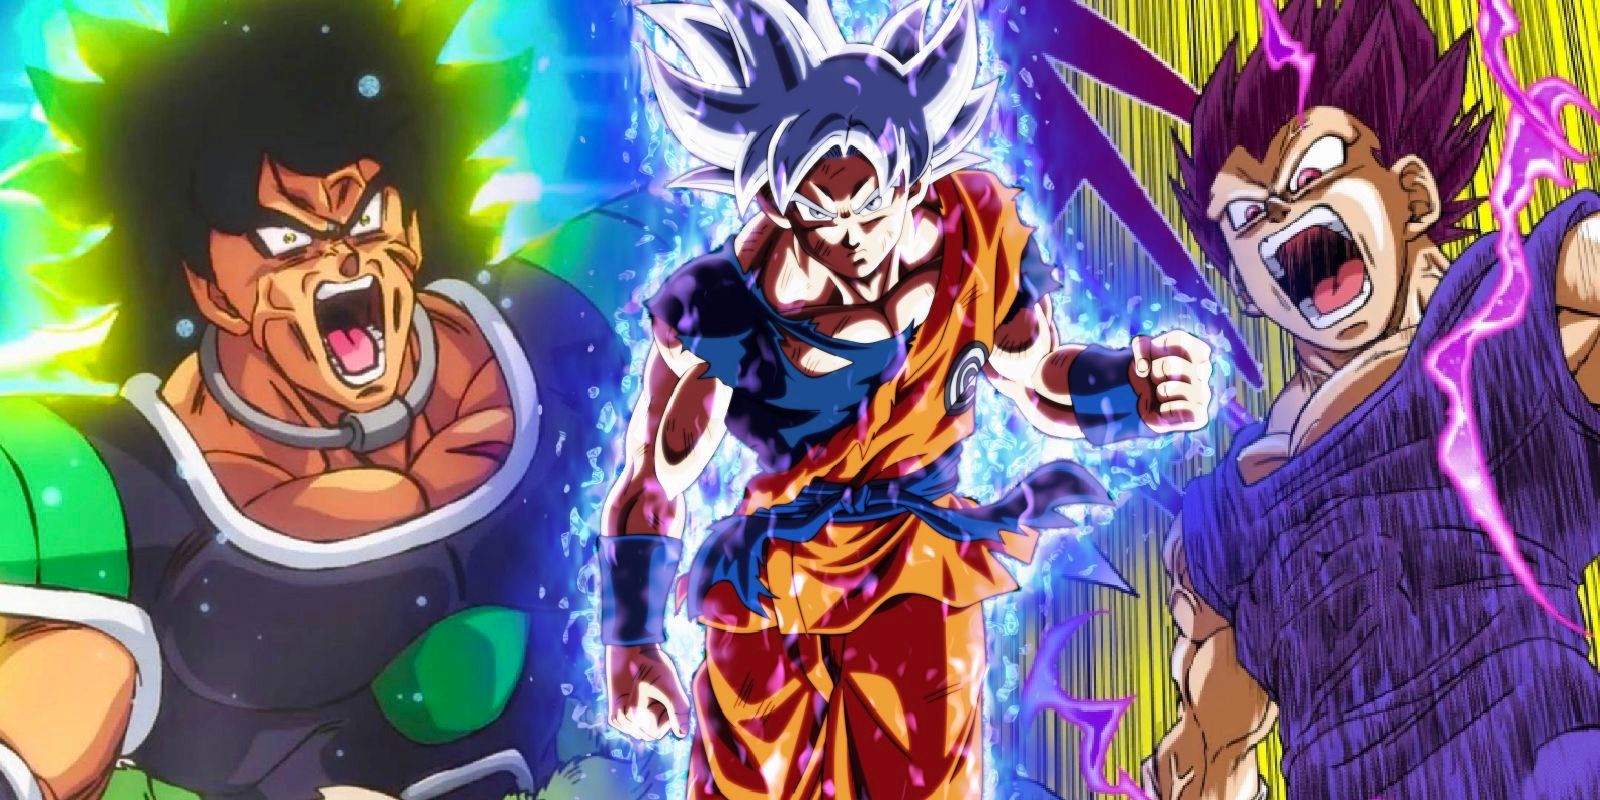 Dragon Ball: Androids 17 and 18 / Characters - TV Tropes